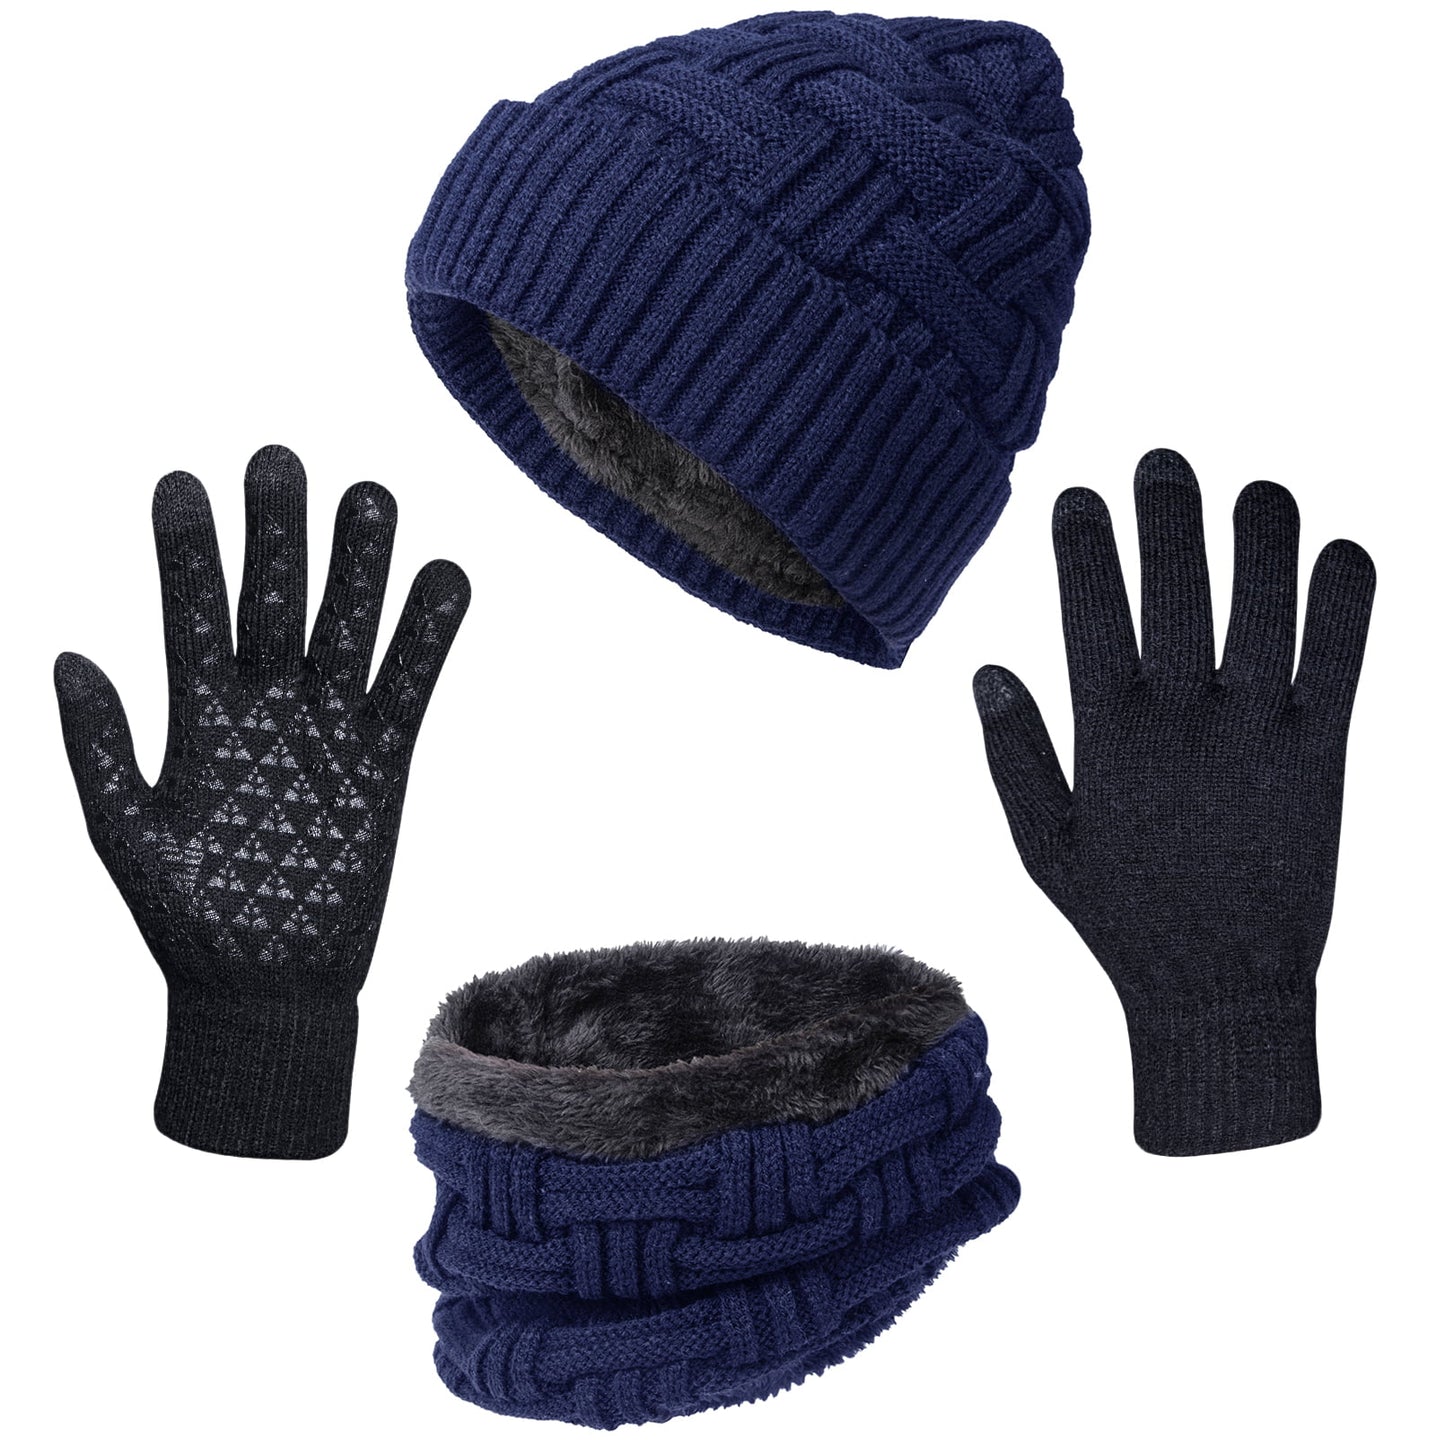 Loritta 3 Pacs Winter Beanie Hat Scarf and Touch Screen Gloves Set for Men Women